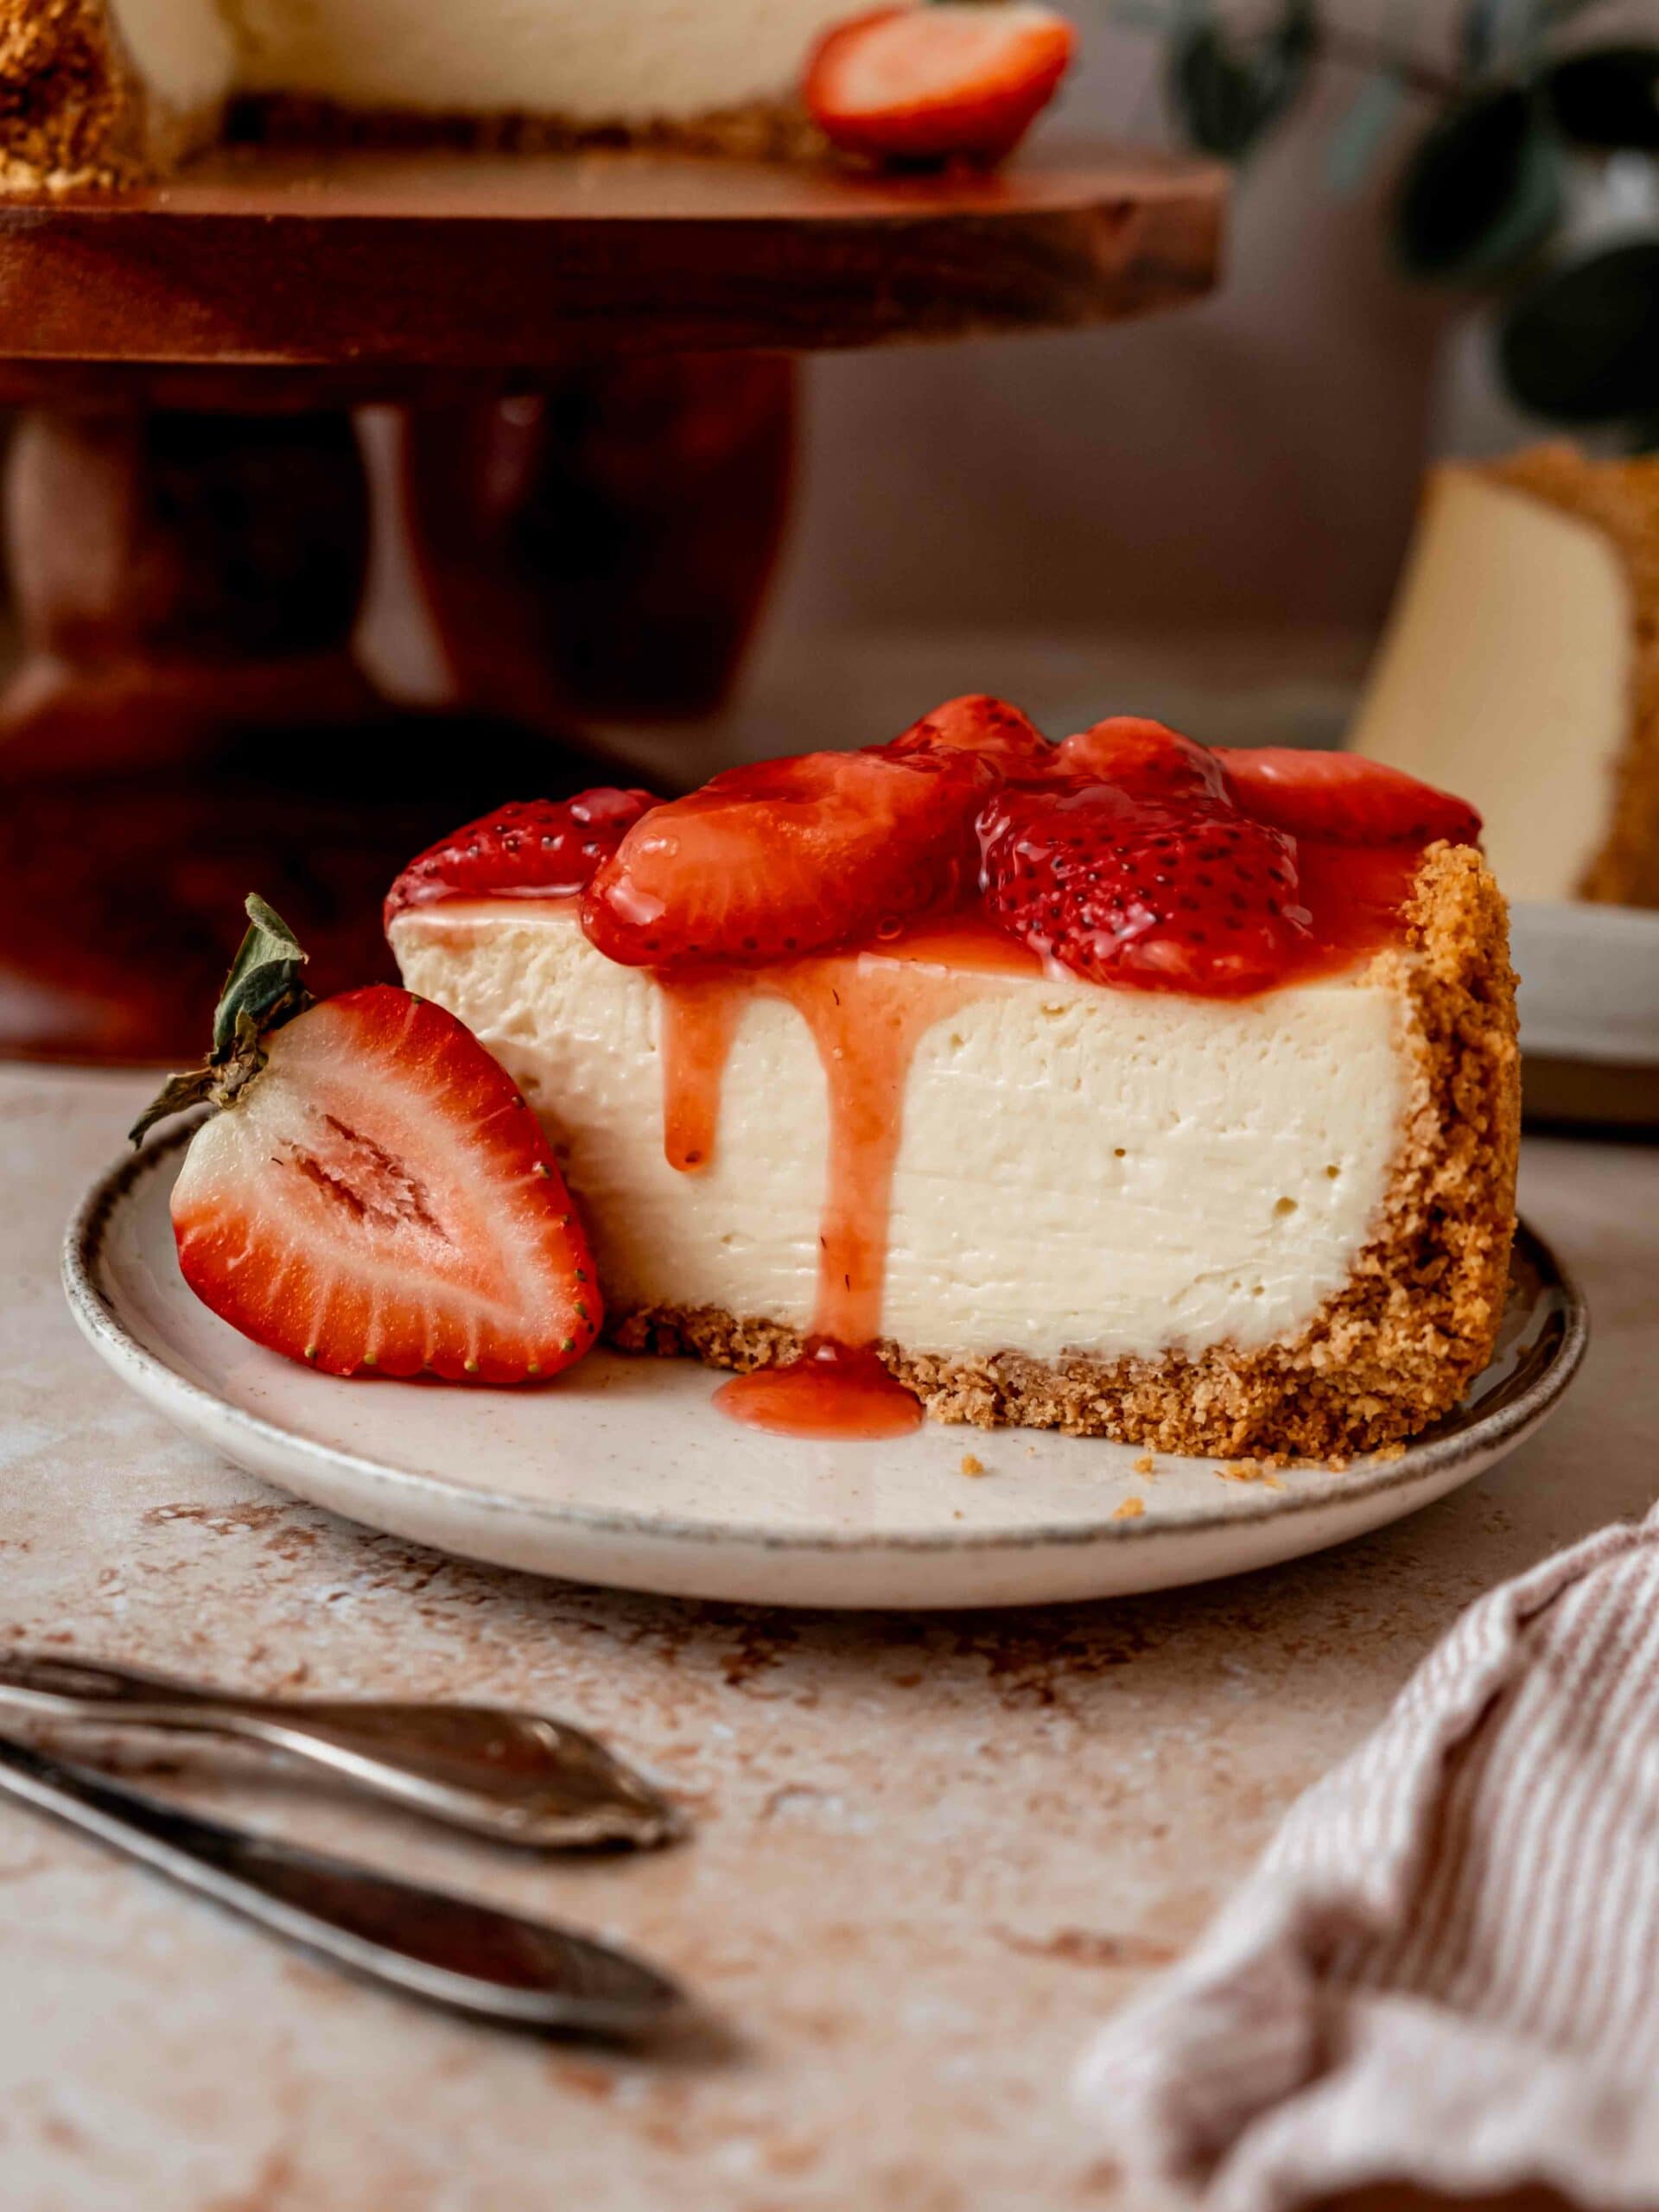 Velvety smooth cheesecake with graham cracker crust on a plate with sweet strawberry topping.